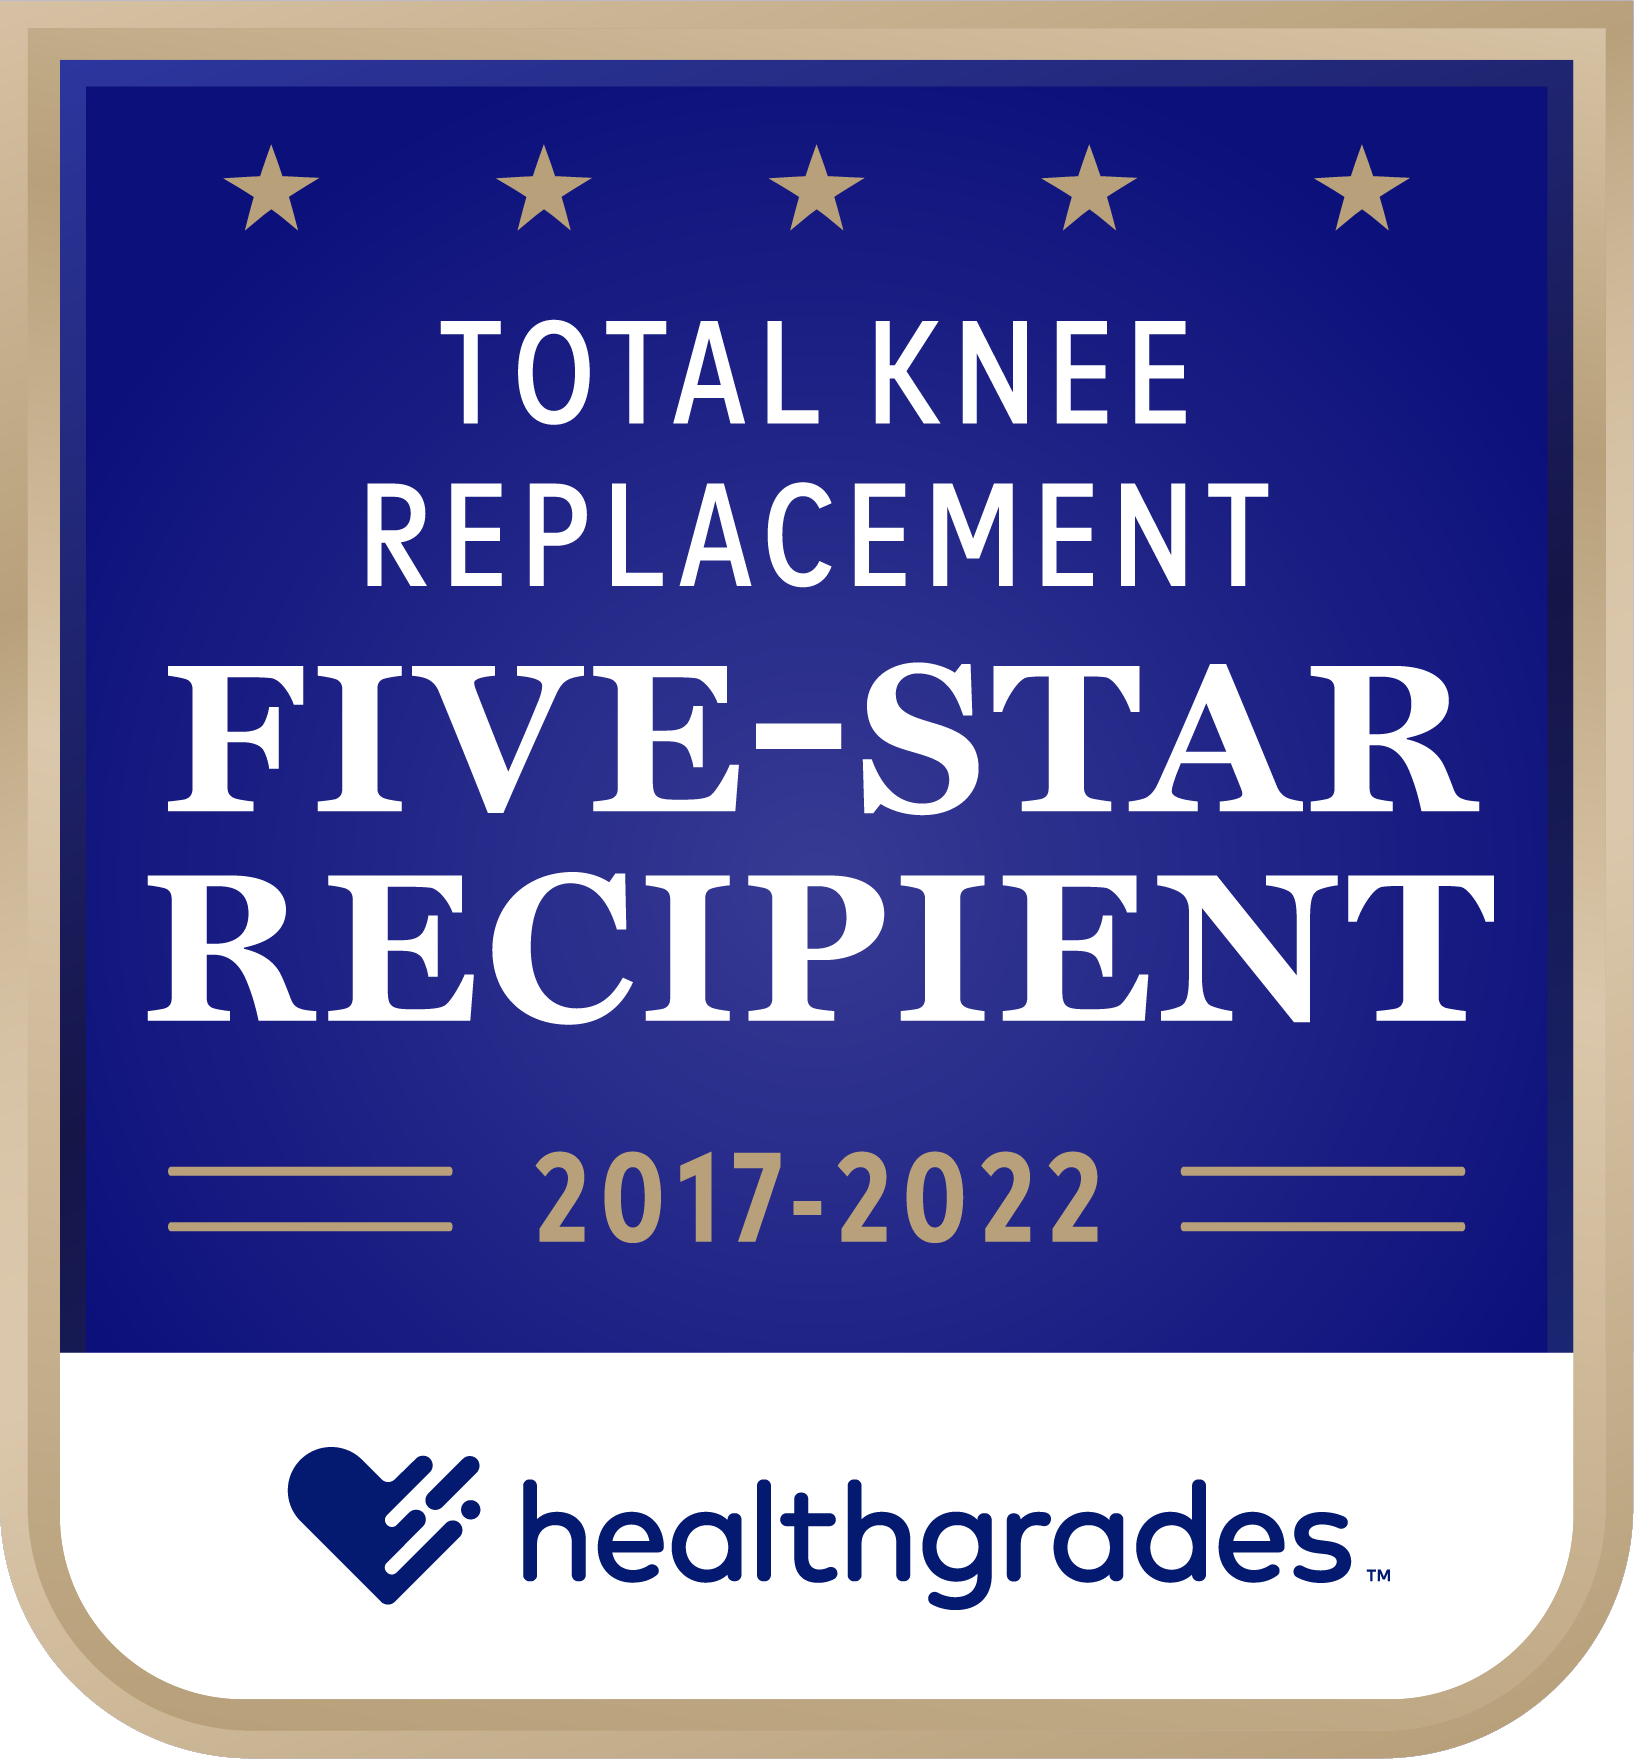 Five_Star_for_Total_Knee_Replacement_Image_2017-2022